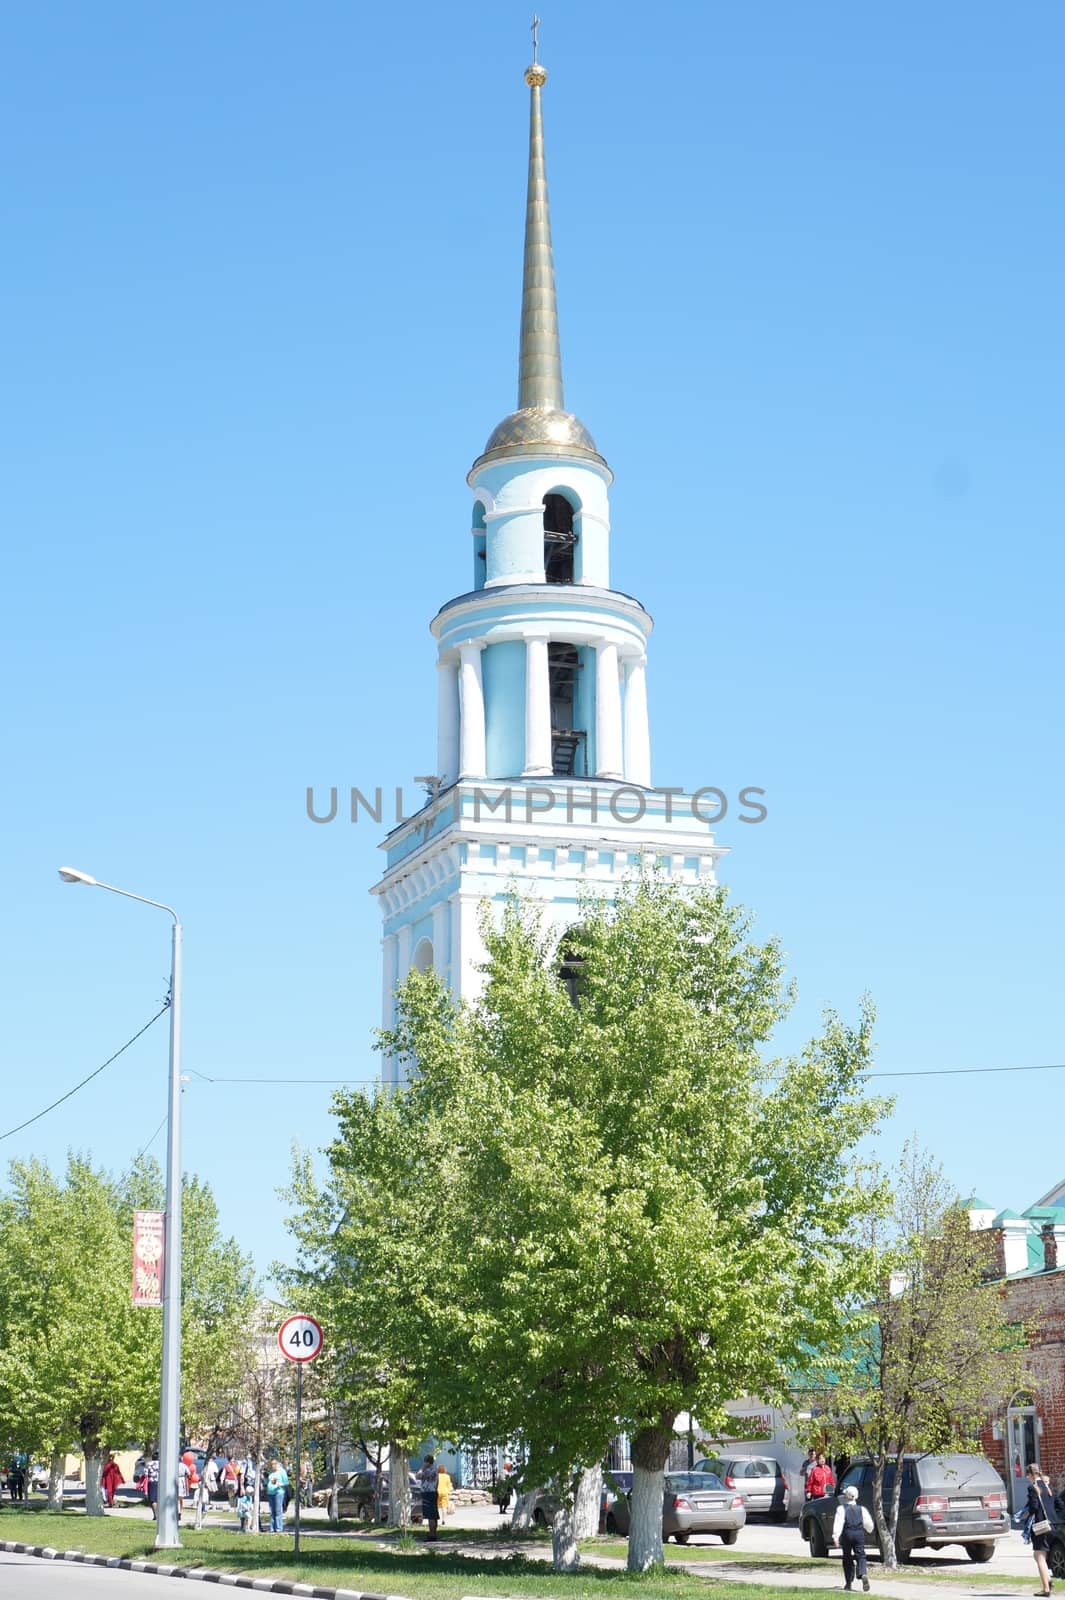 The steeple of the church against the blue sky